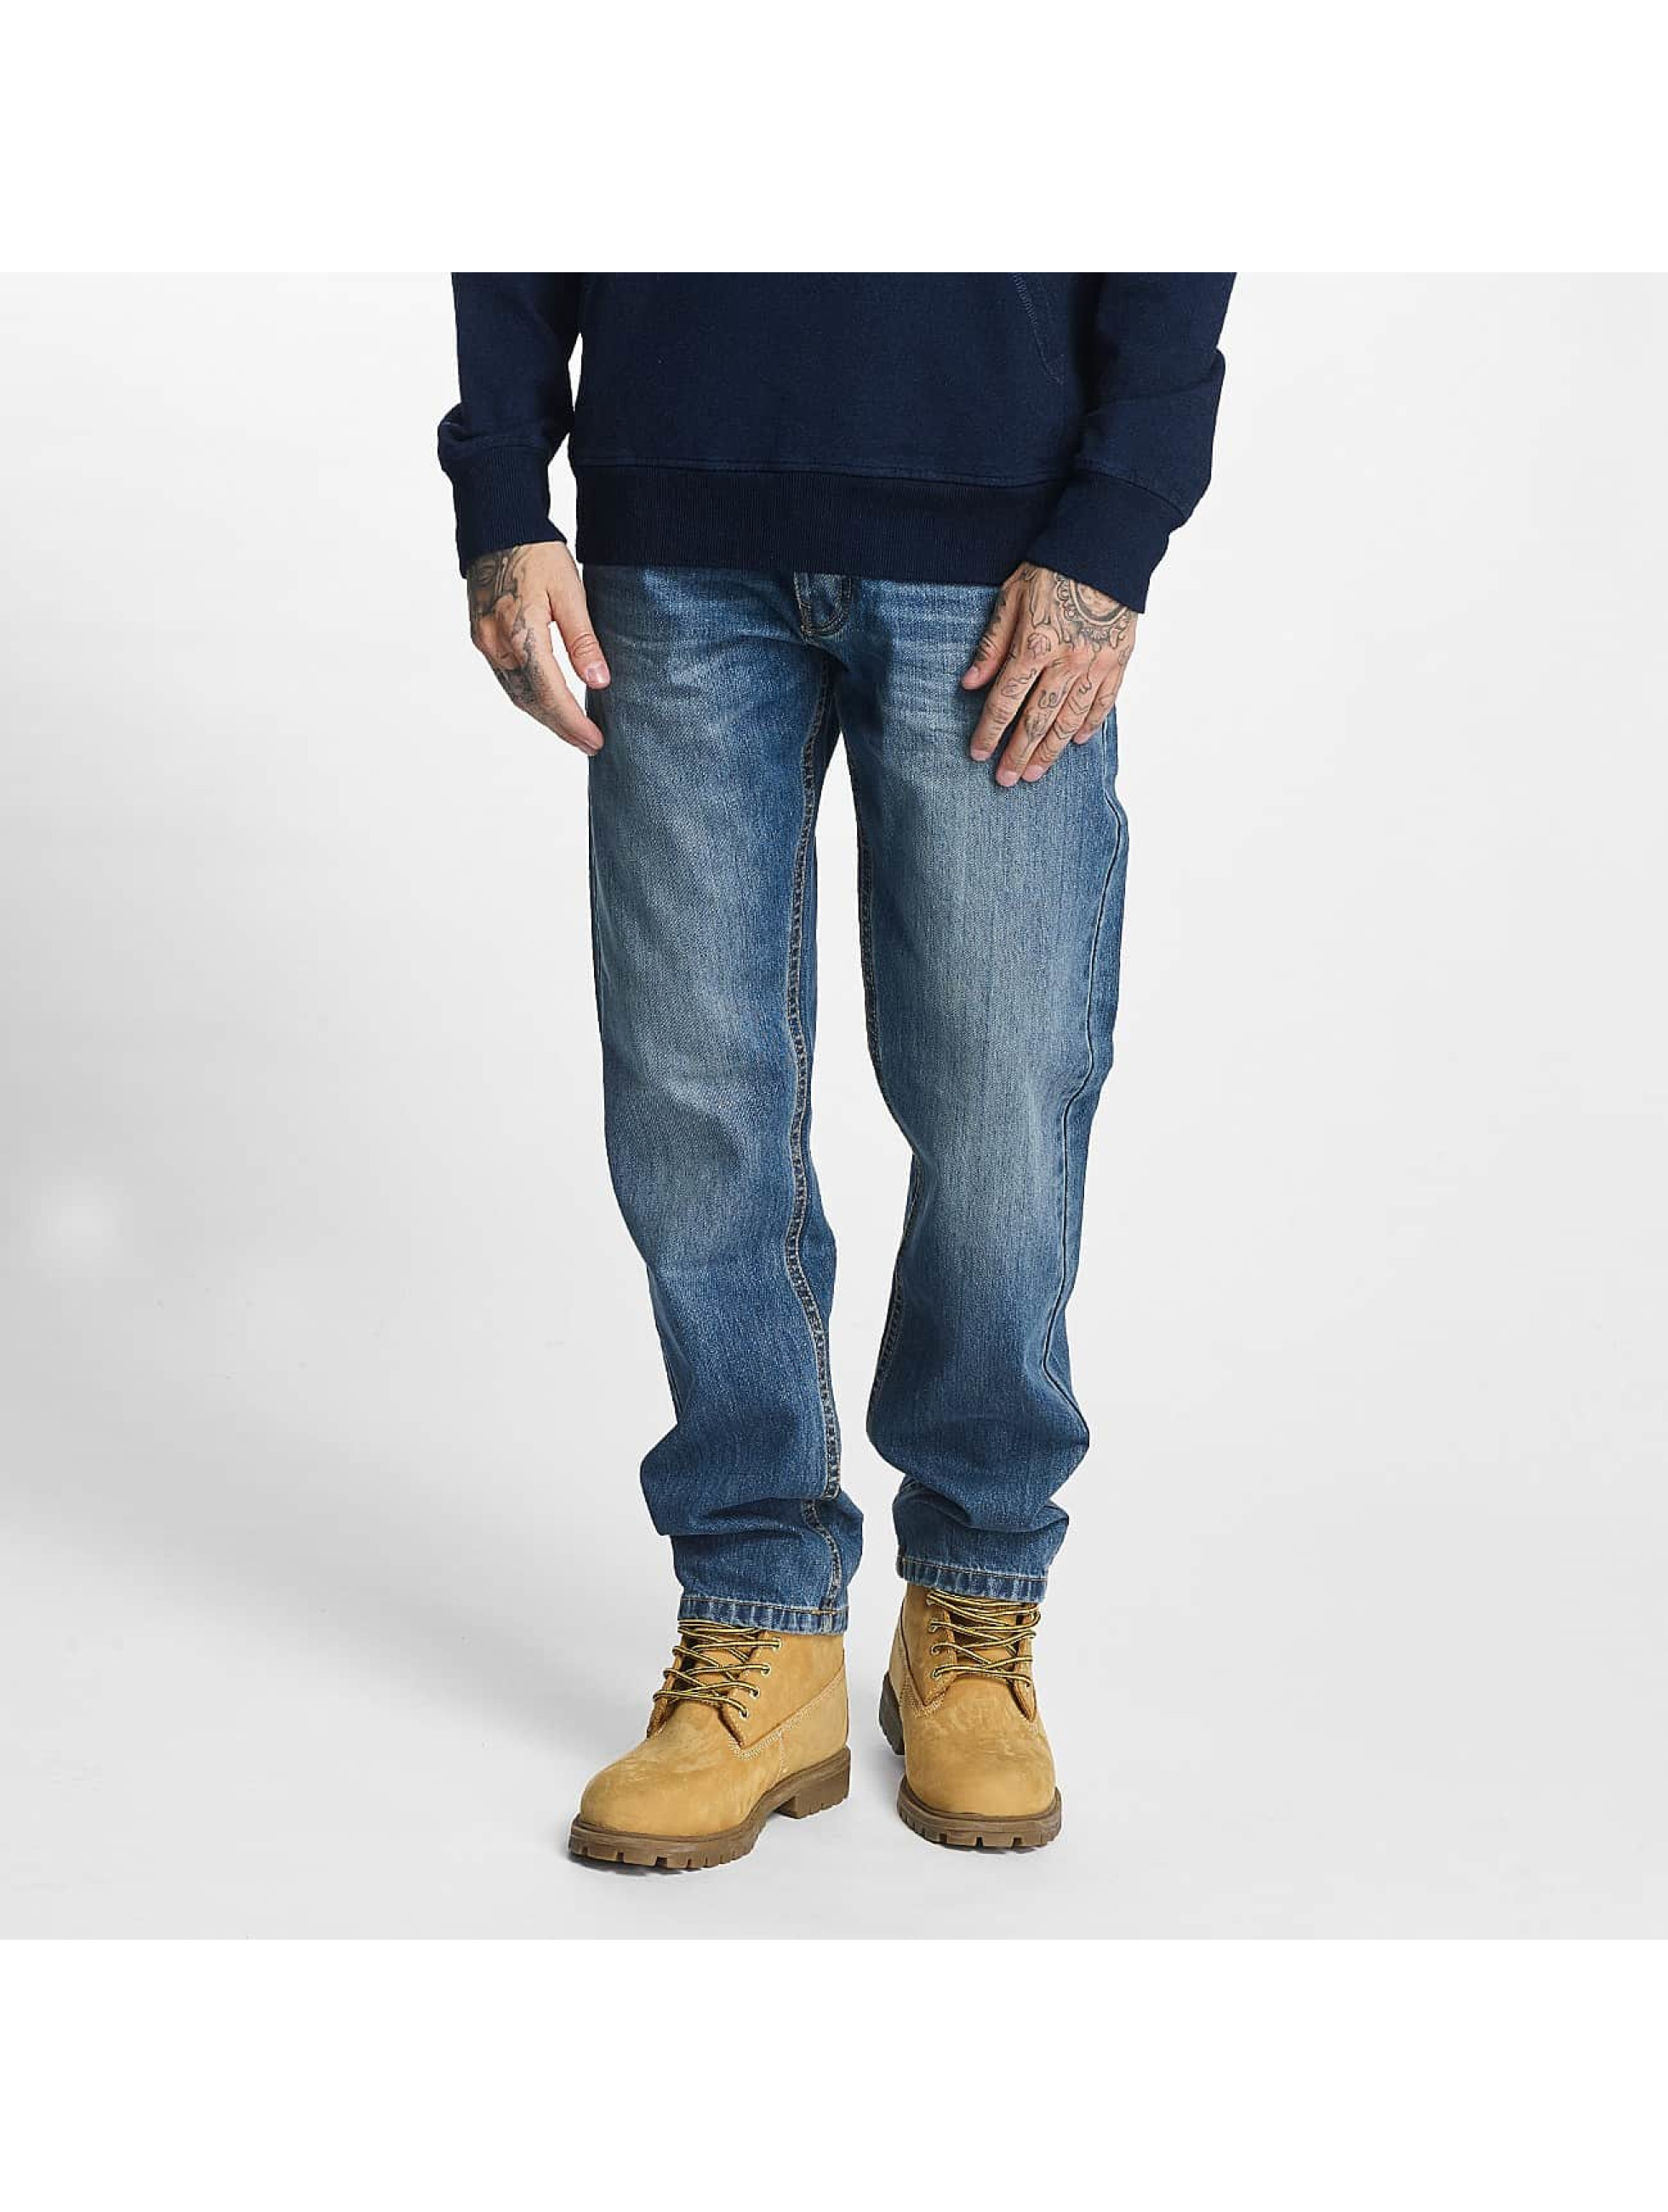 Dickies Michigan bleu Jean coupe droite homme